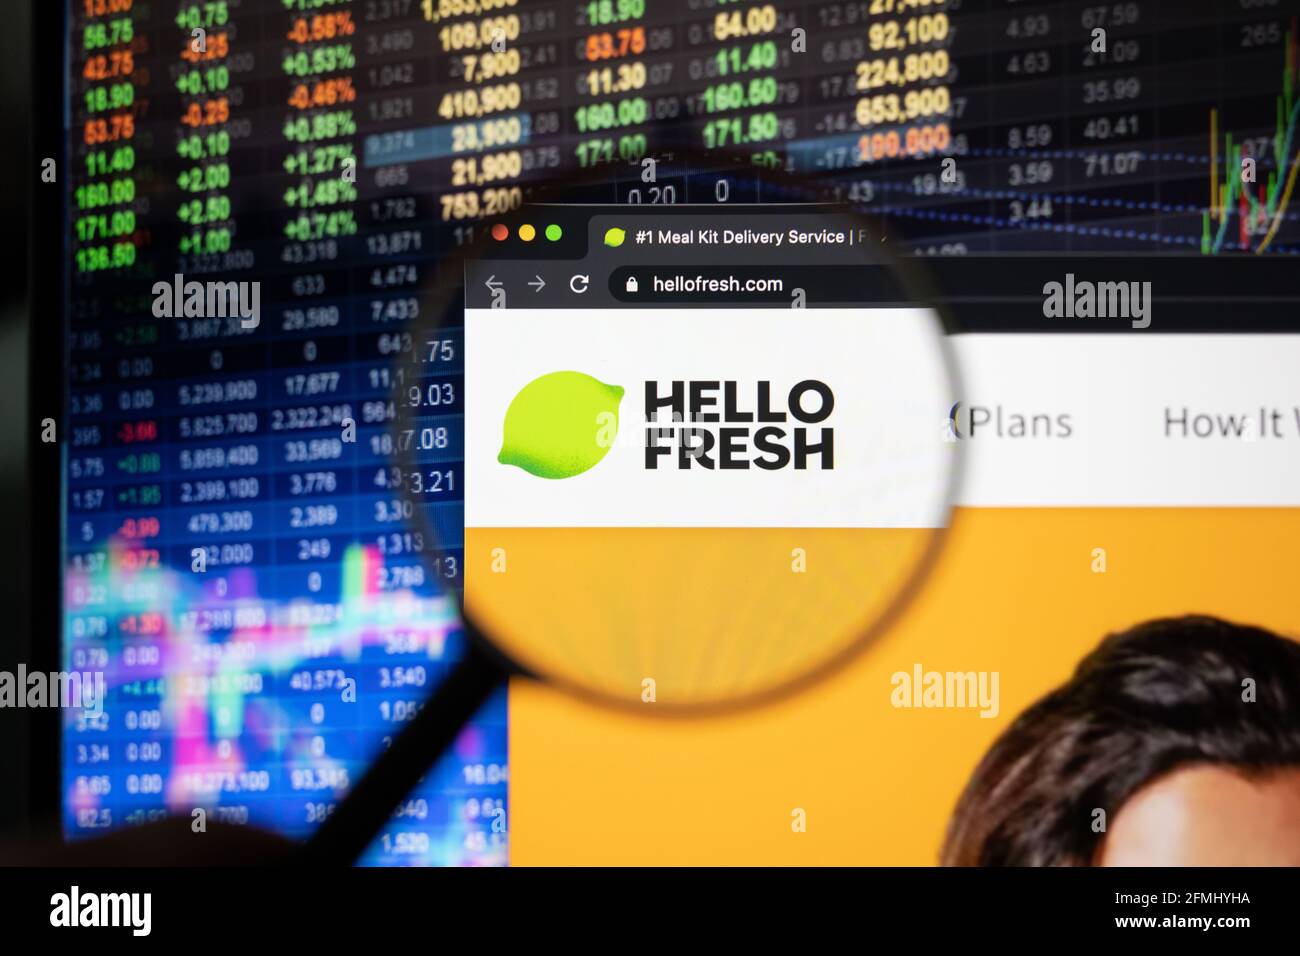 Hellofresh company logo on a website with blurry stock market developments in the background, seen on a computer screen through a magnifying glass Stock Photo